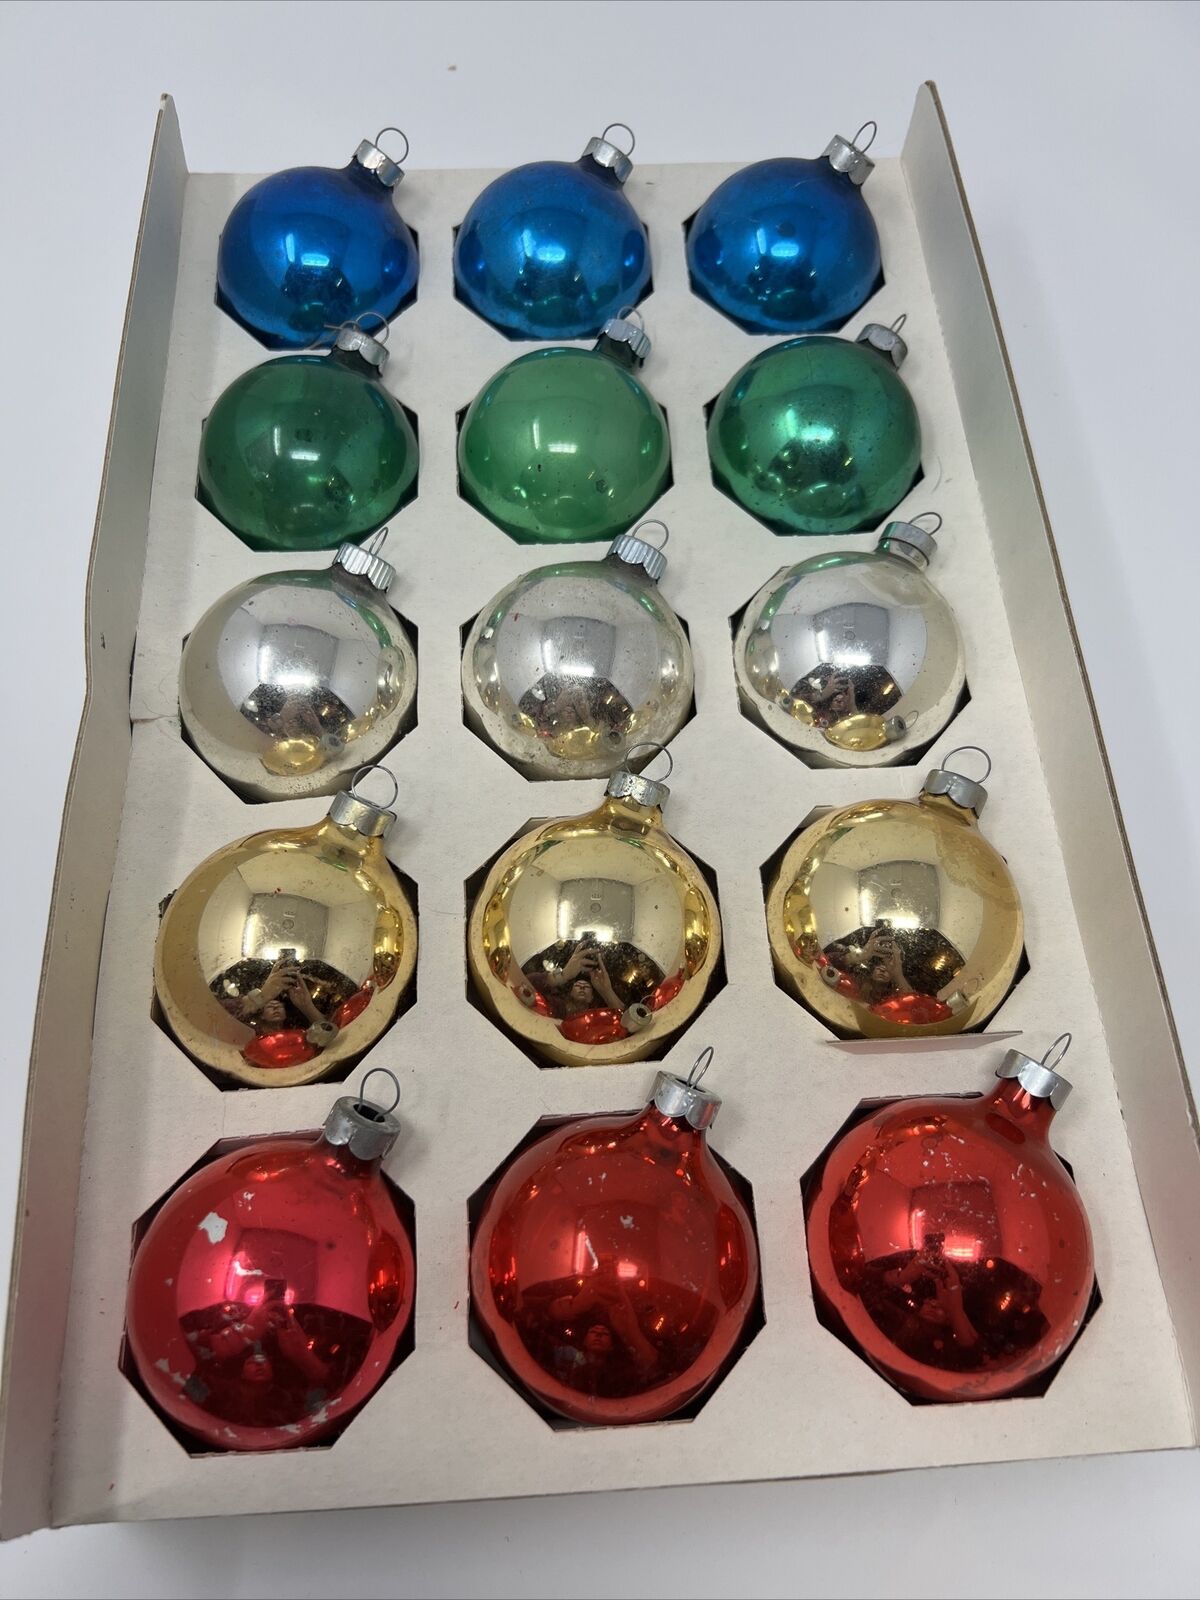 Lot of 15 Vintage Christmas Tree Shiny Glass Ball Ornaments Assorted Multicolor